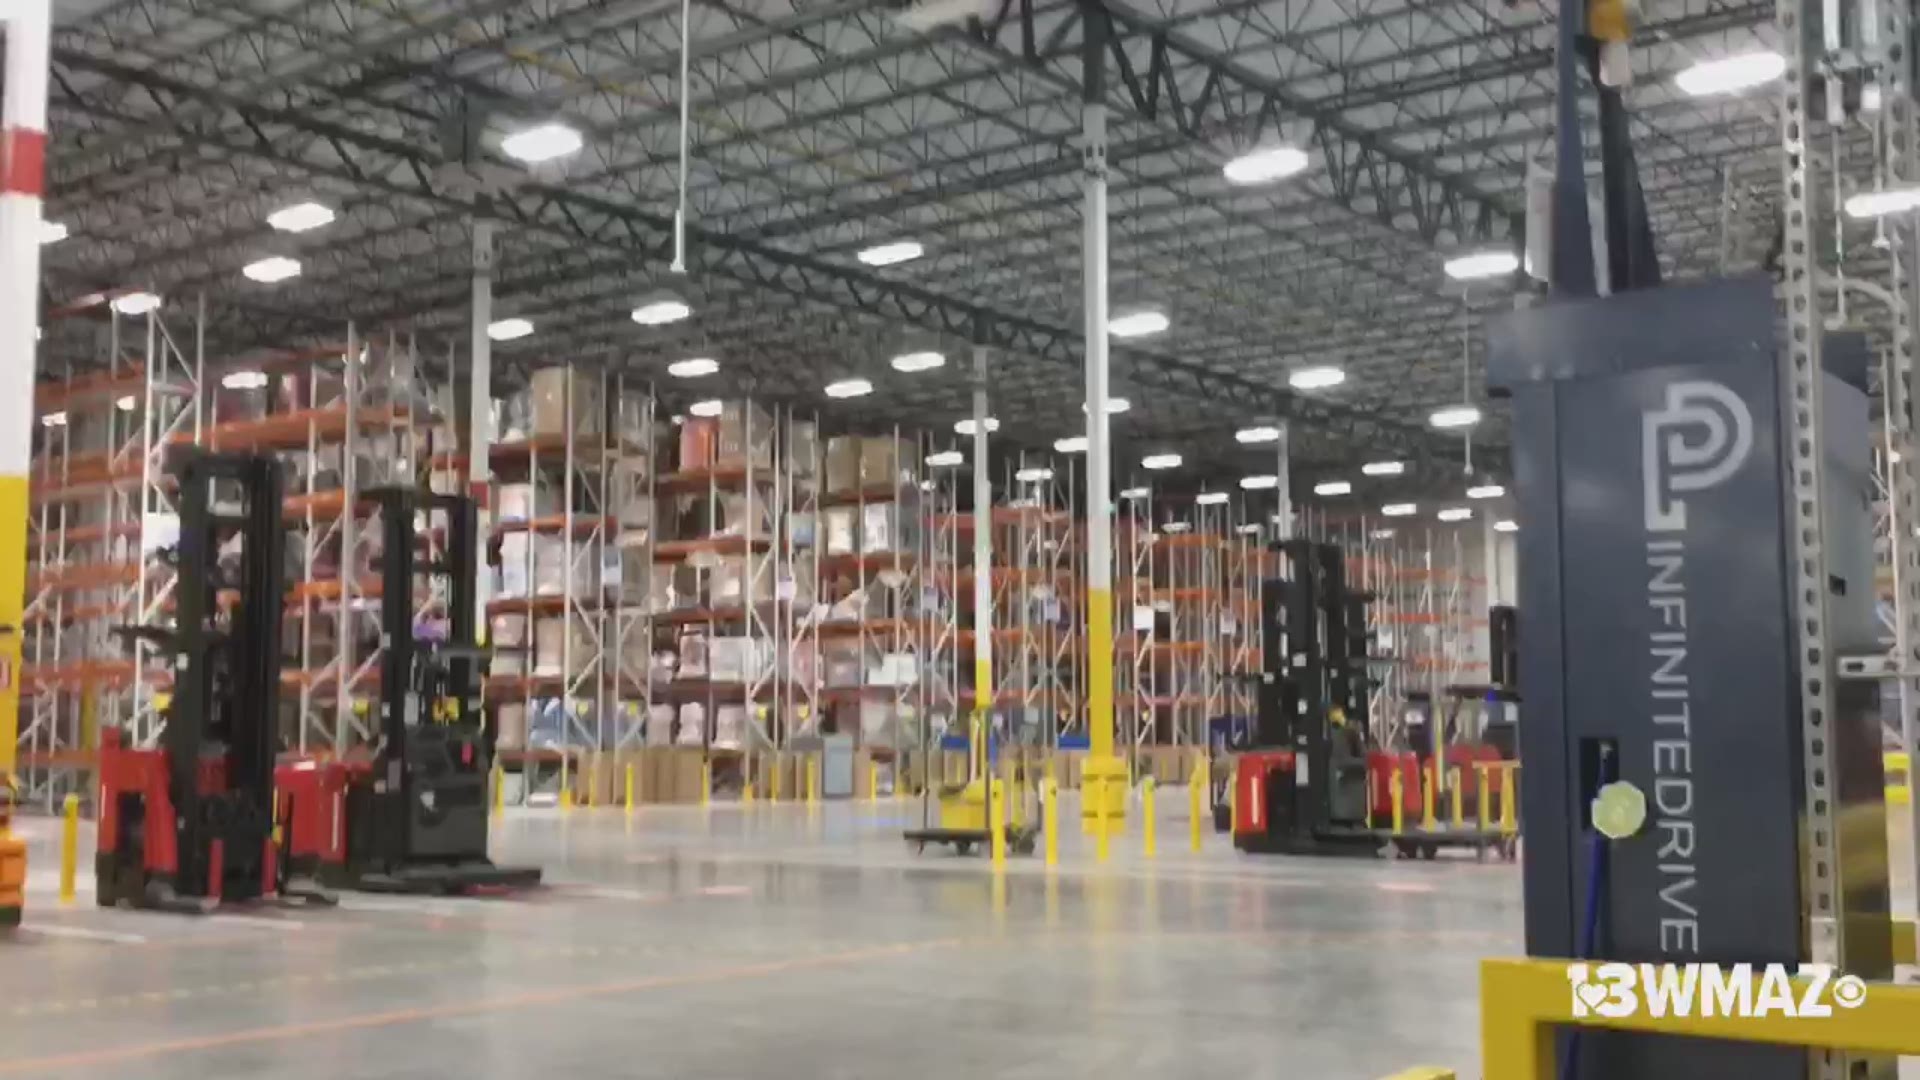 The new Amazon fulfillment center in South Bibb has finally opened and we took a tour of the inside to see what it looks like.